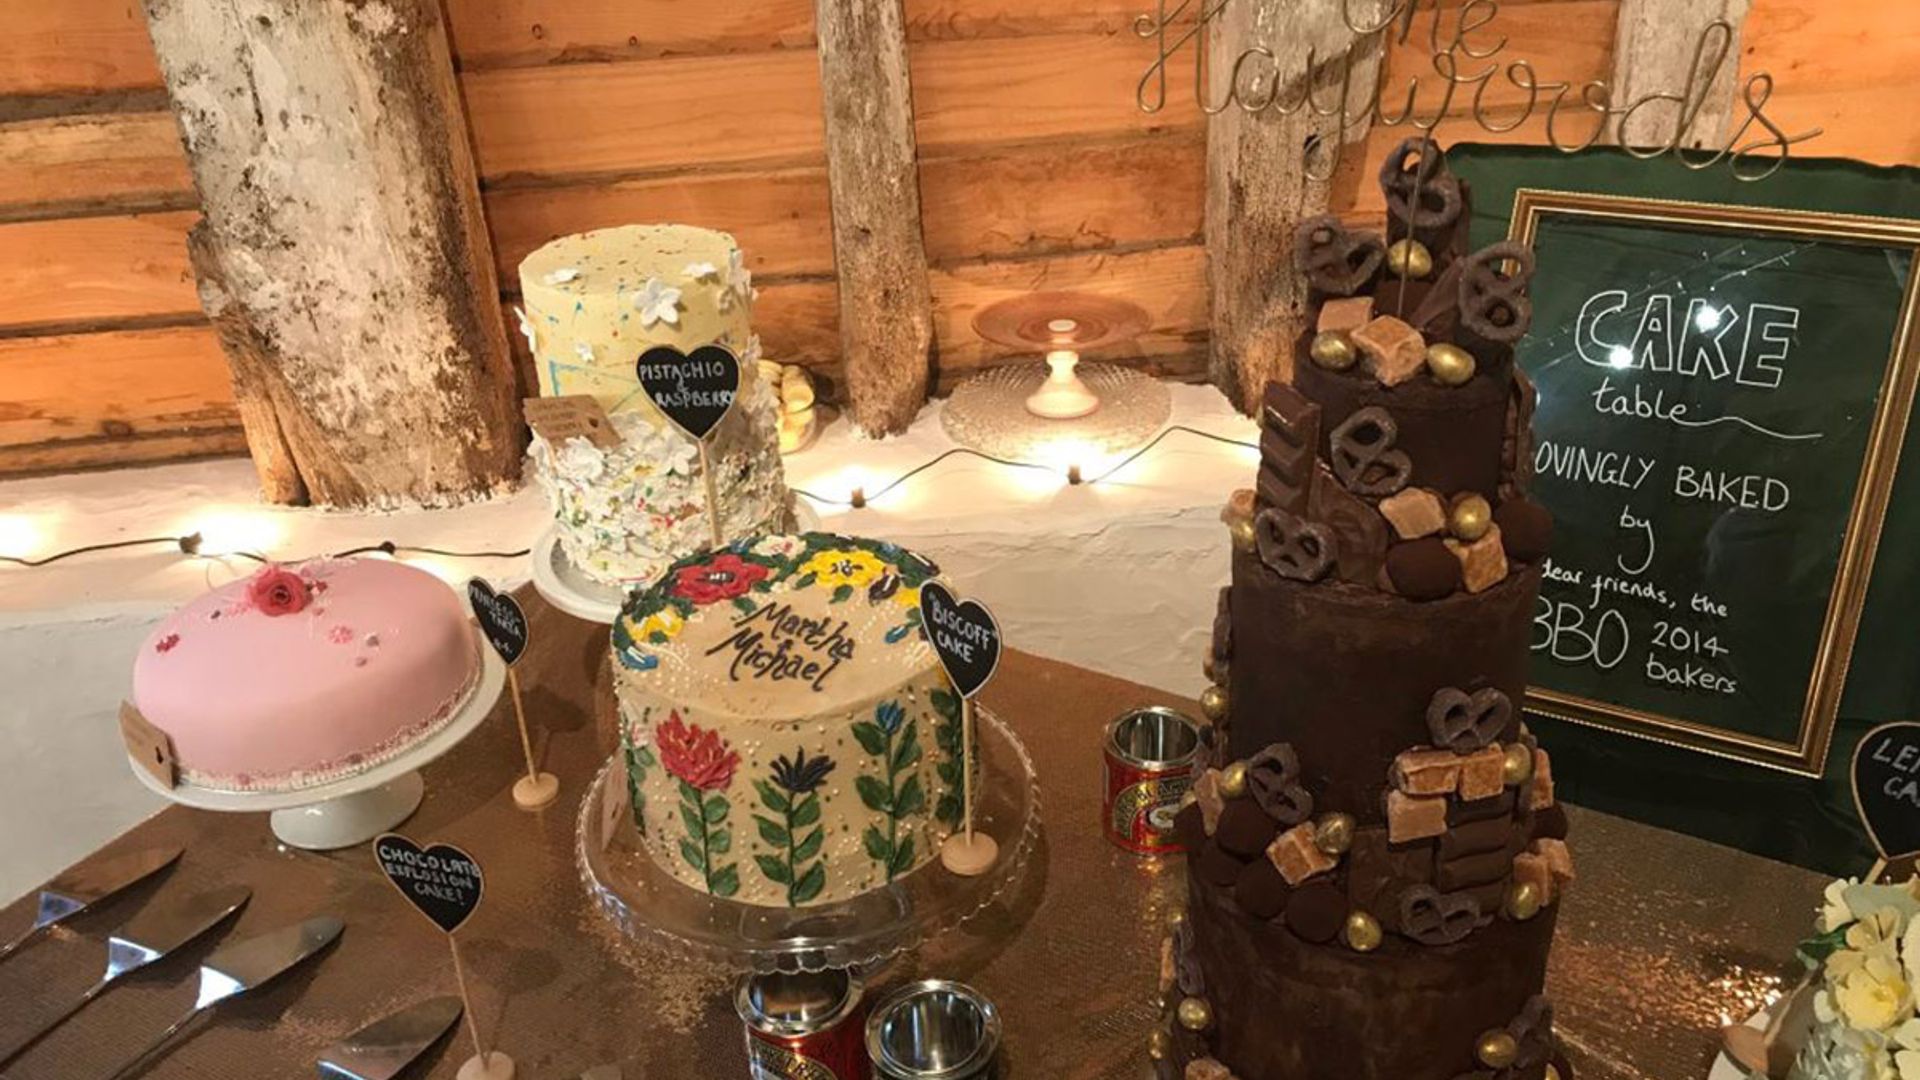 There was a Great British Bake Off wedding over the weekend - can you guess who?